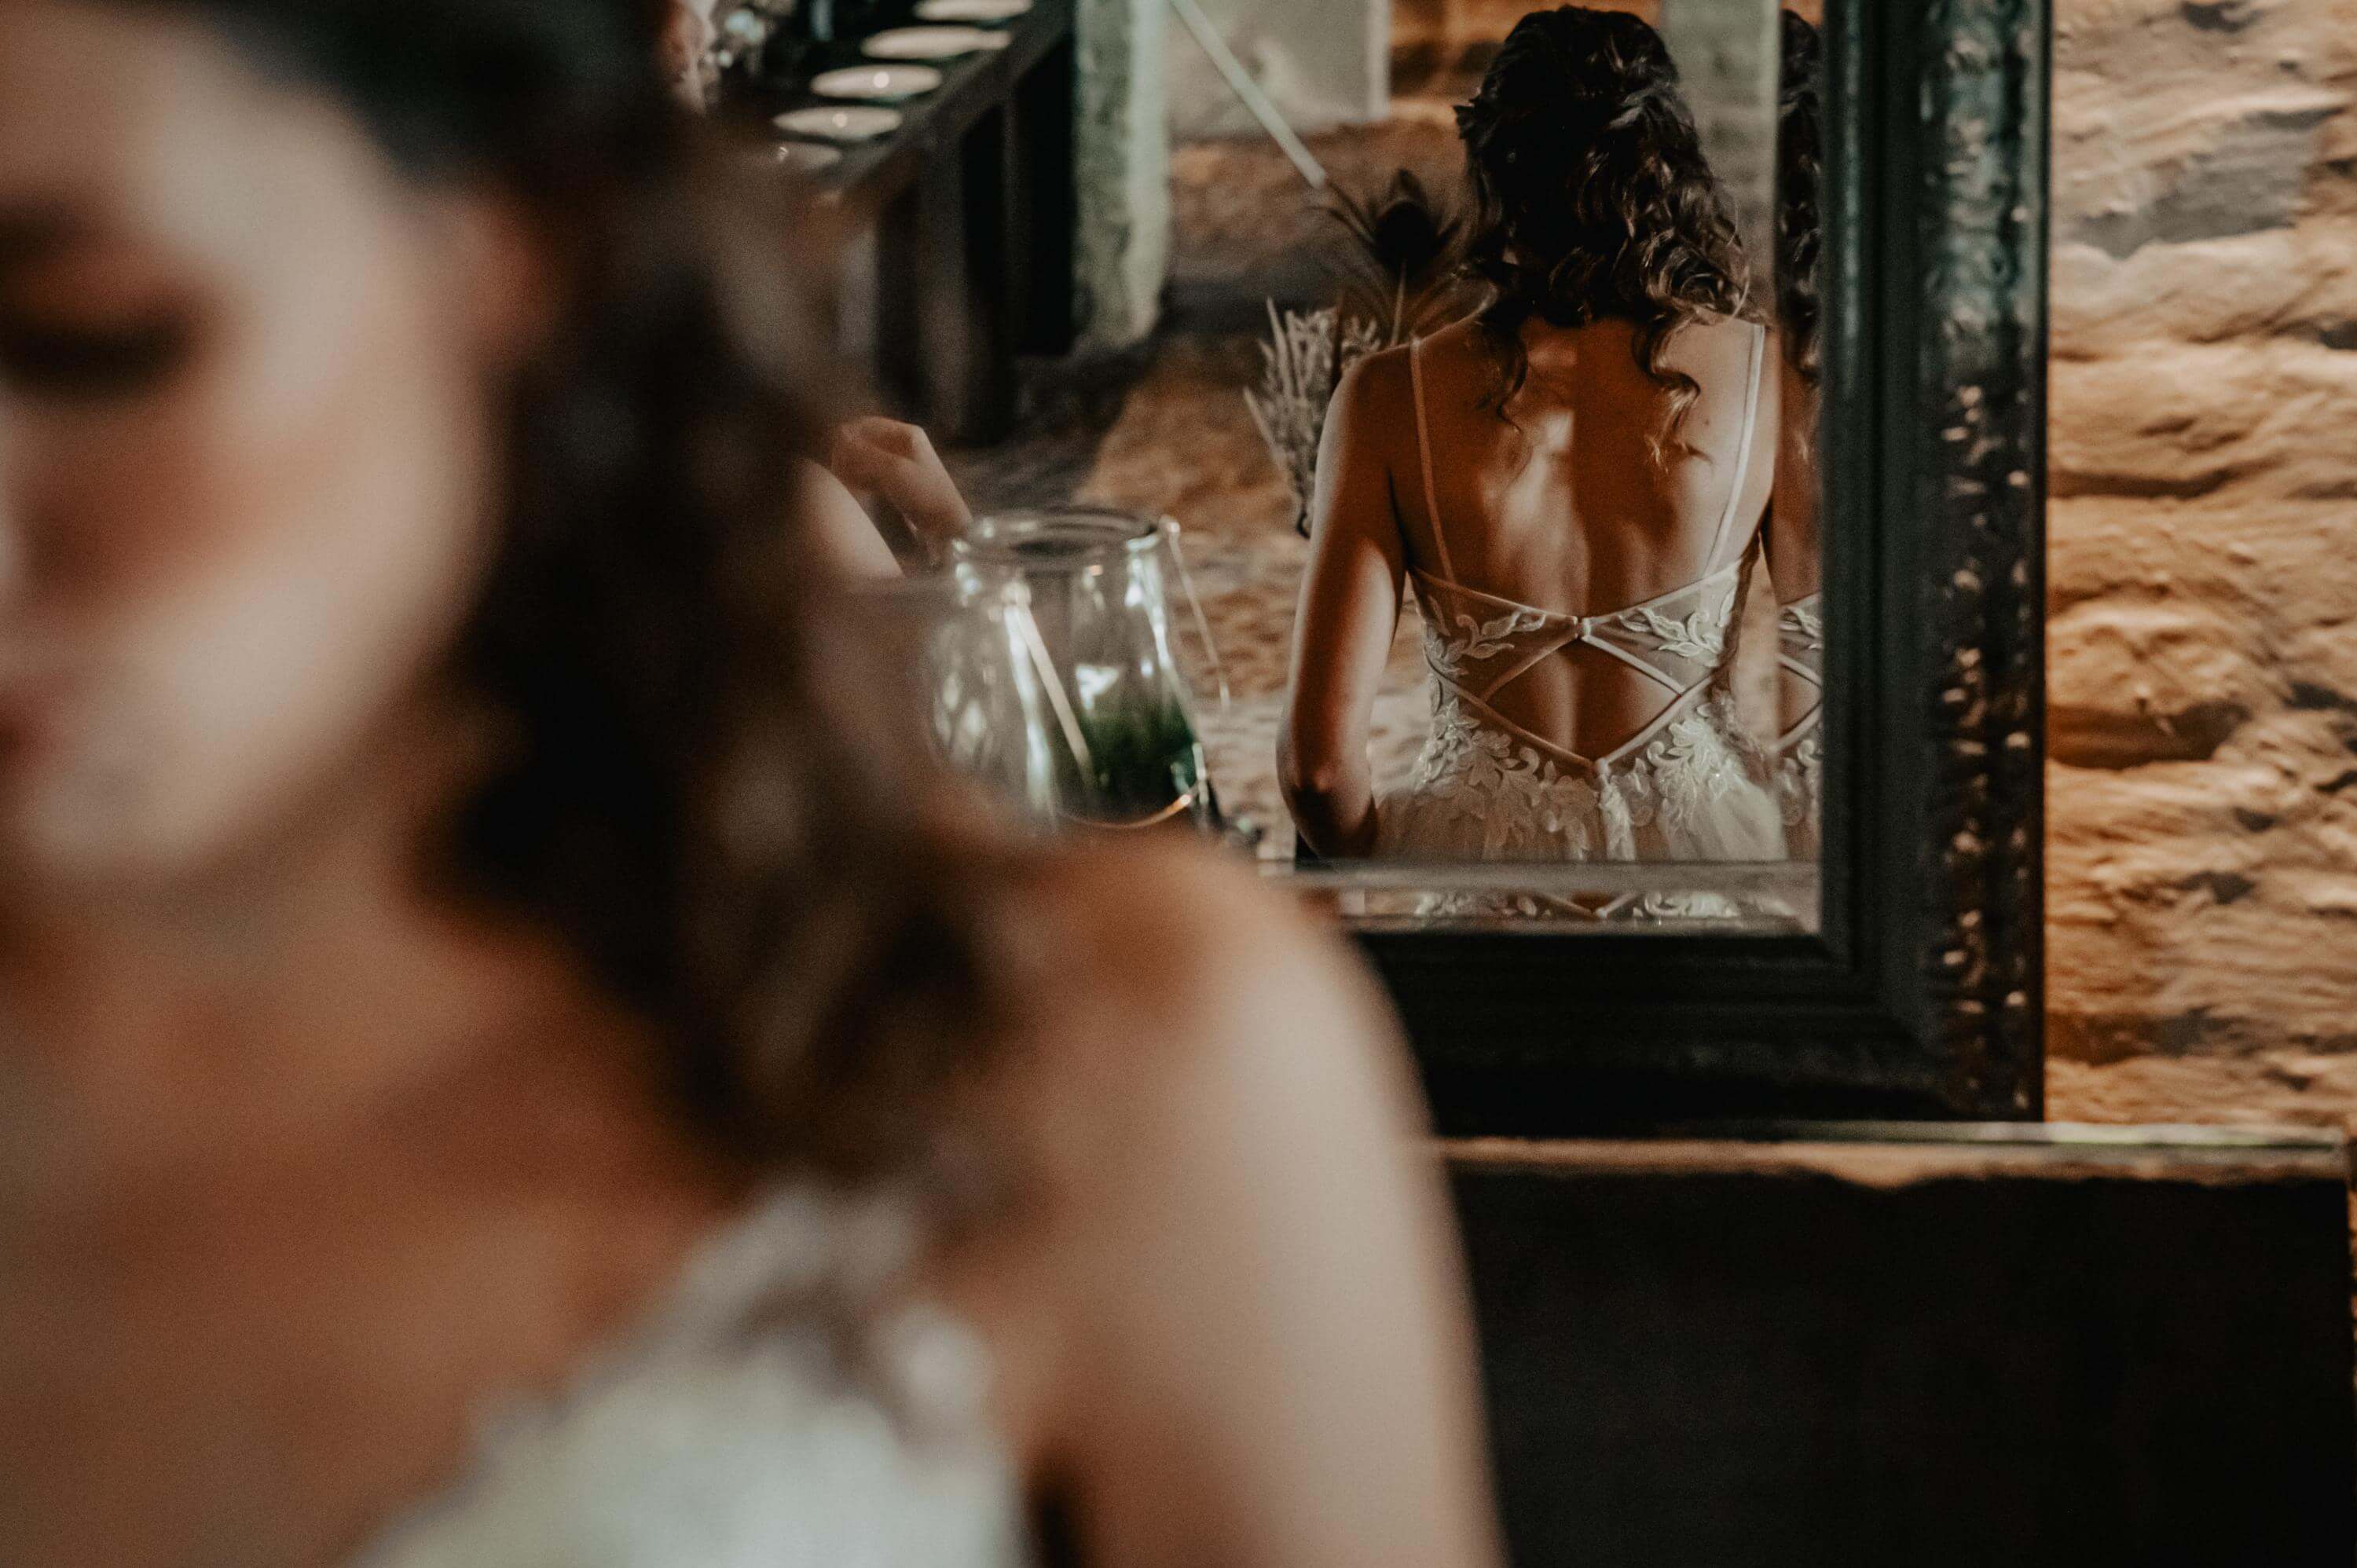 In a large mirror you can see the rear view of the bride in a wedding dress with curly hair and a wide back décolleté.